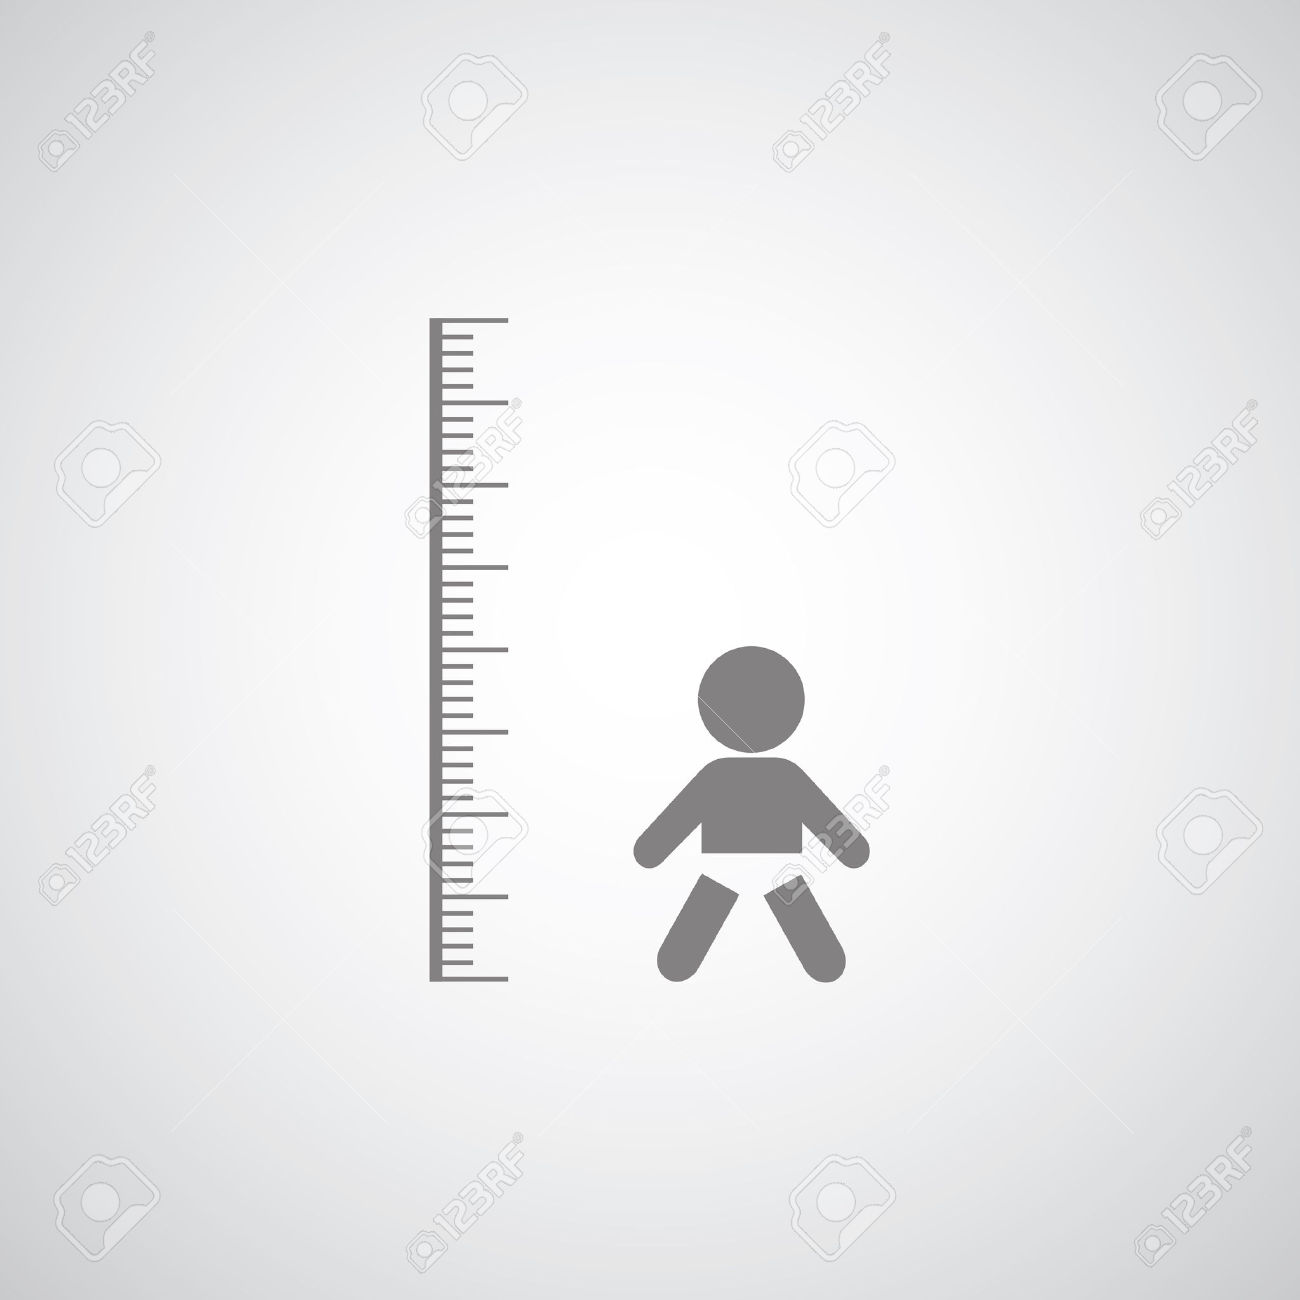 tall clipart measurement